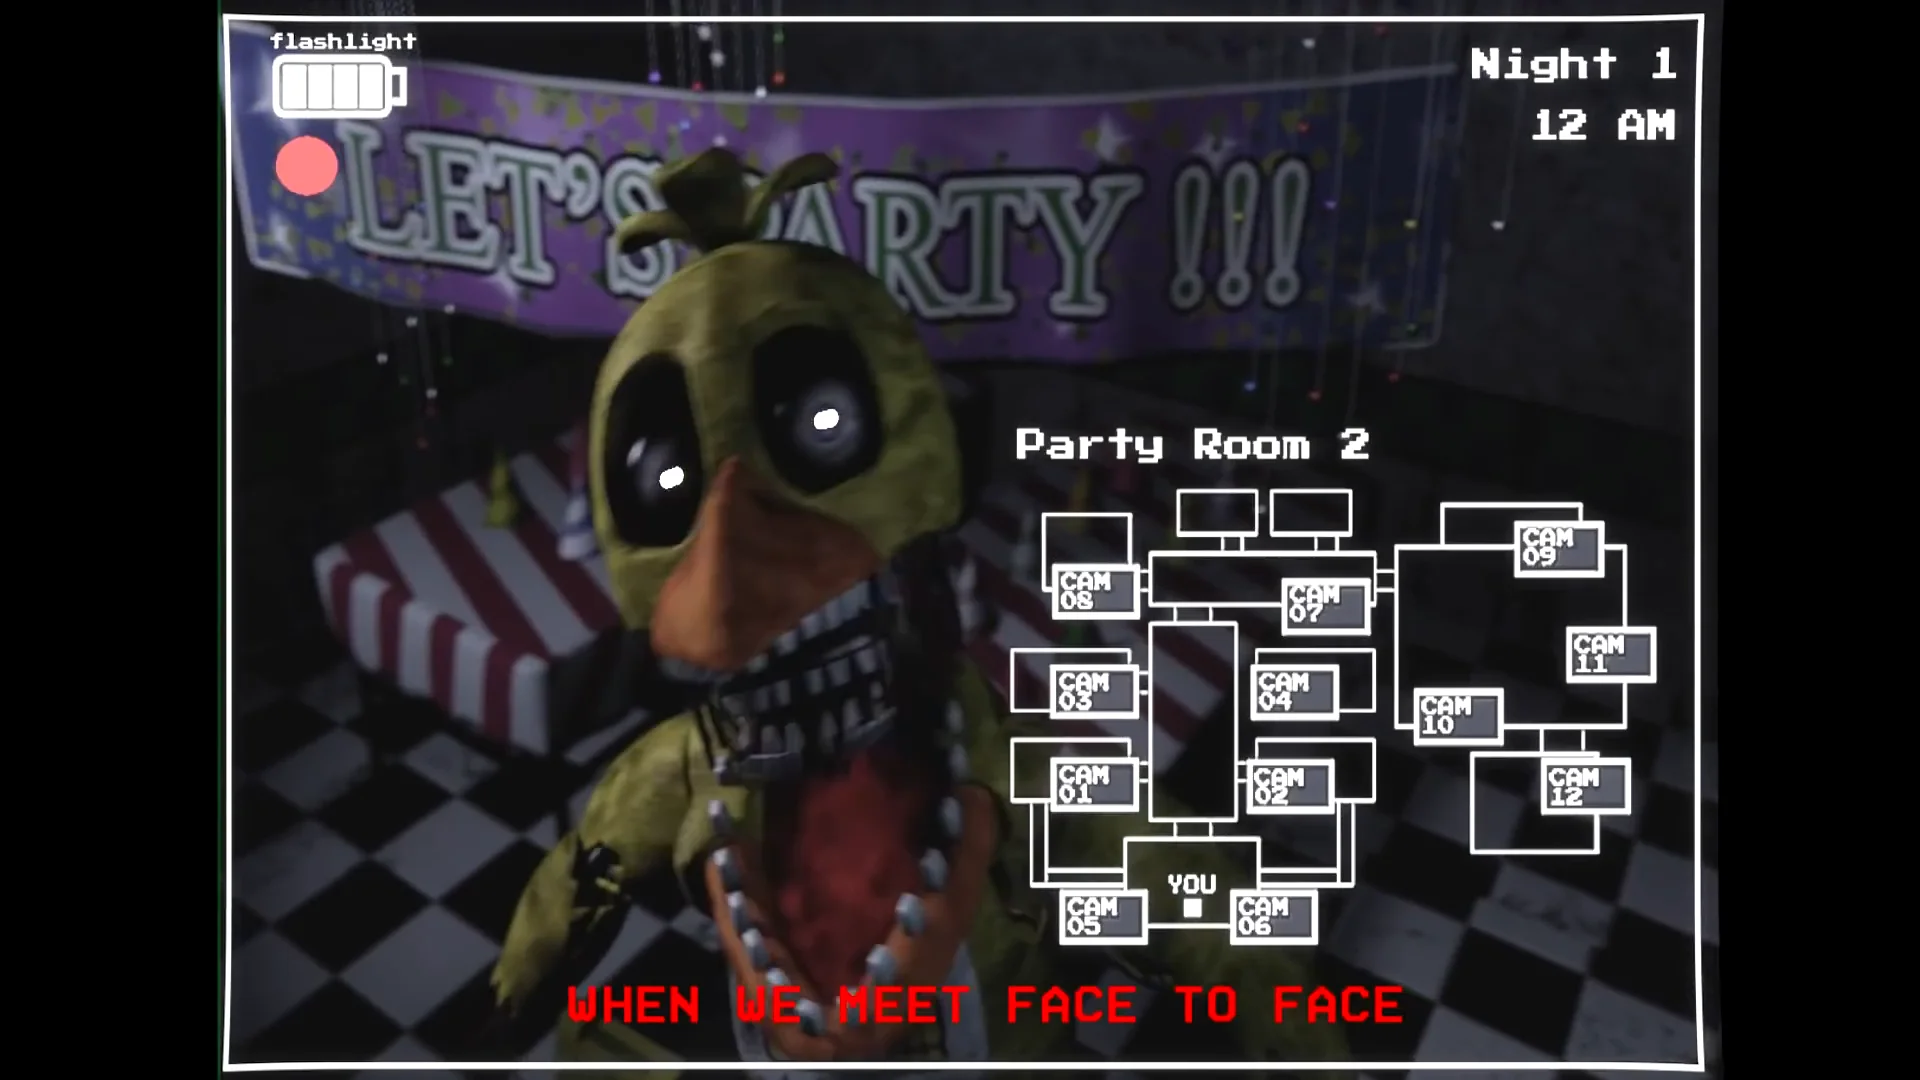 Stream Fnaf 2 song español song by Ray scratch by User 525041273